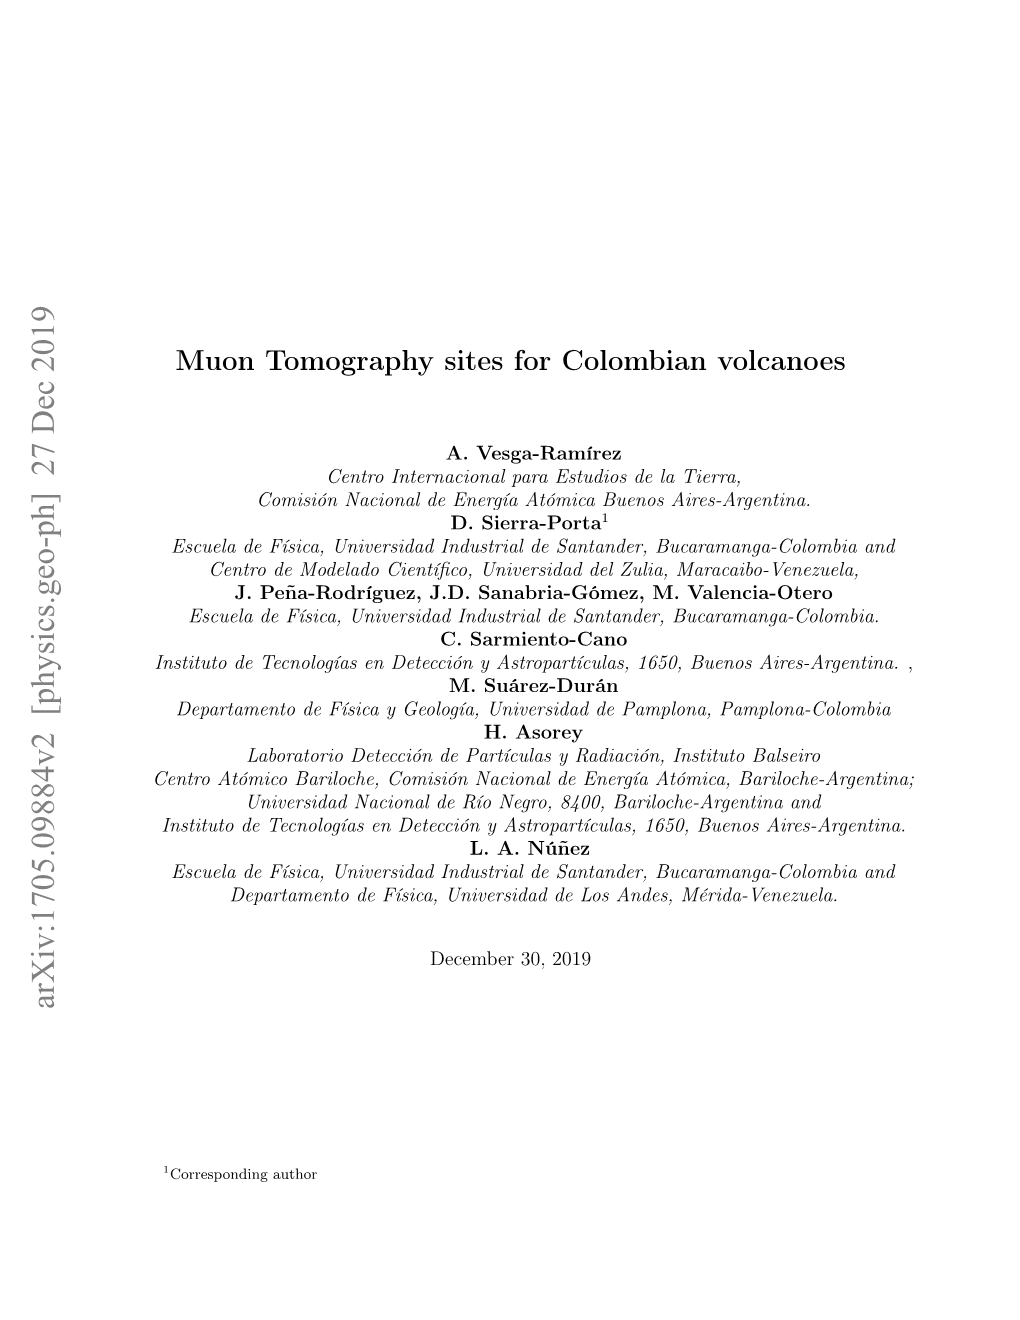 Muon Tomography Sites for Colombian Volcanoes